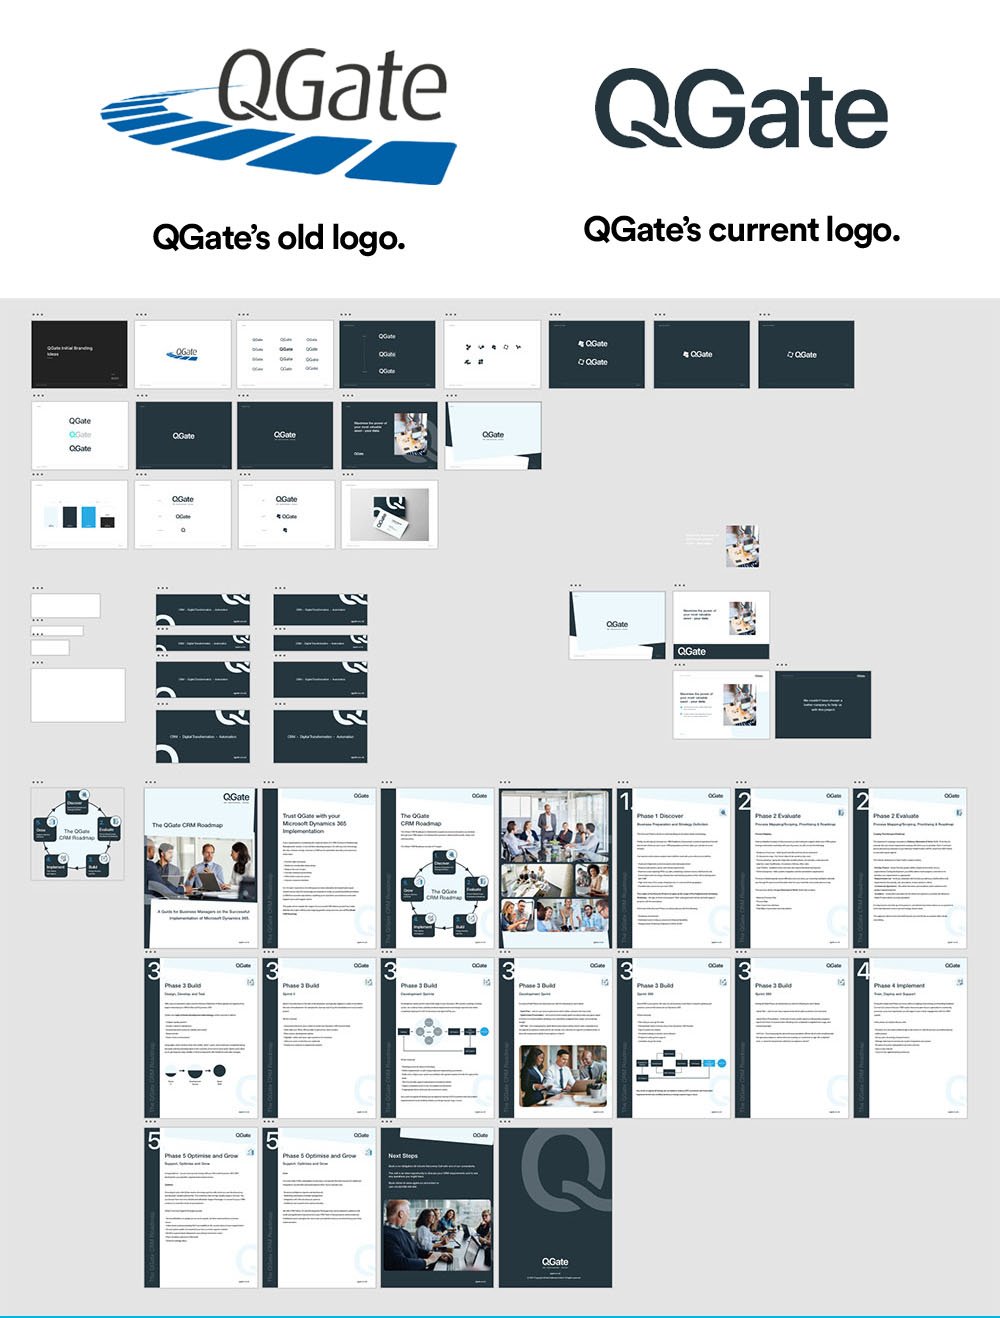 Branding concepts for QGate created by Damteq.